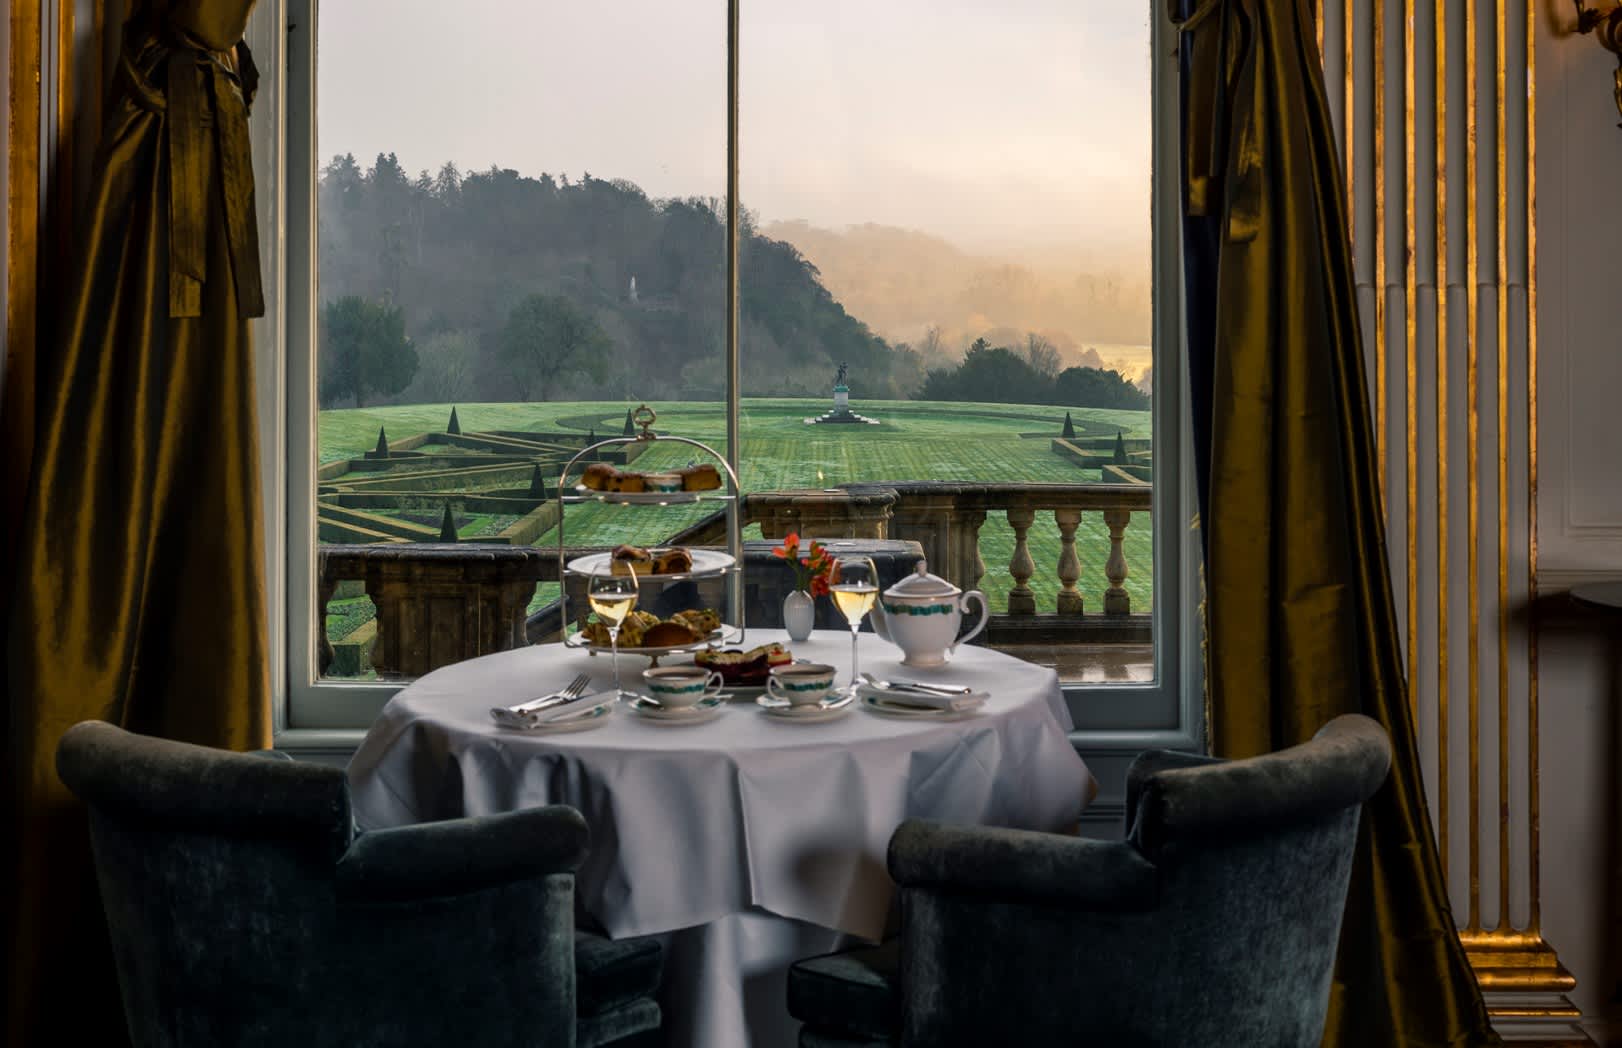 Afternoon Tea at Cliveden House Window